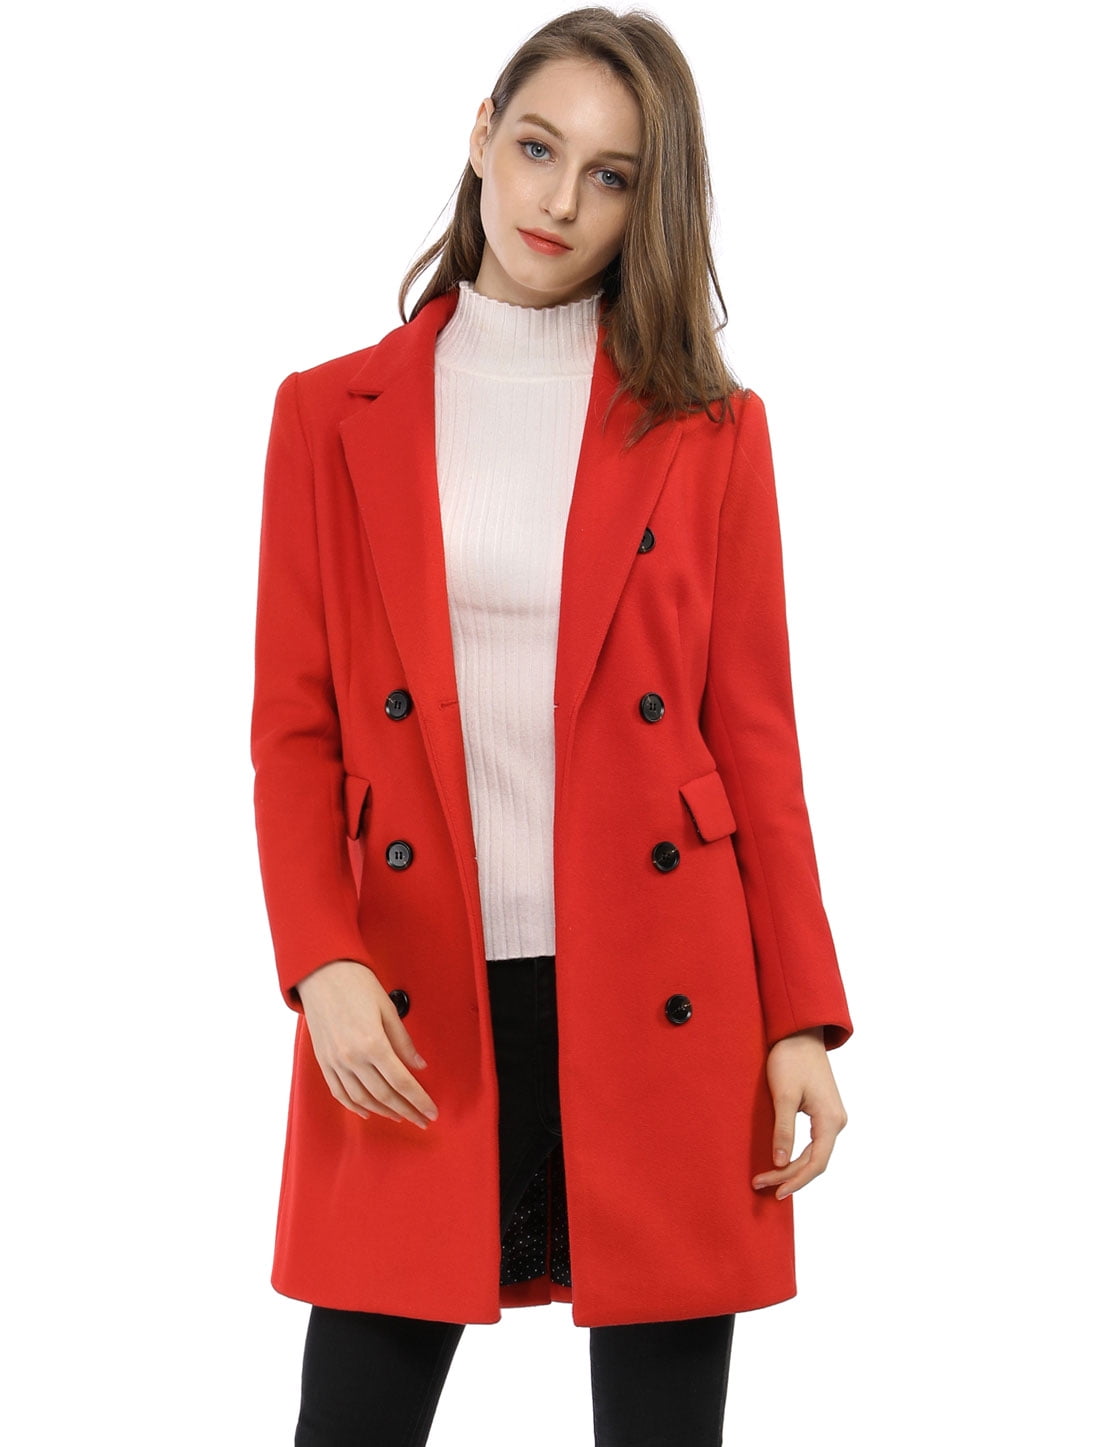 Women Notched Lapel Double Breasted Trench Coat Red-1 XL | Walmart Canada